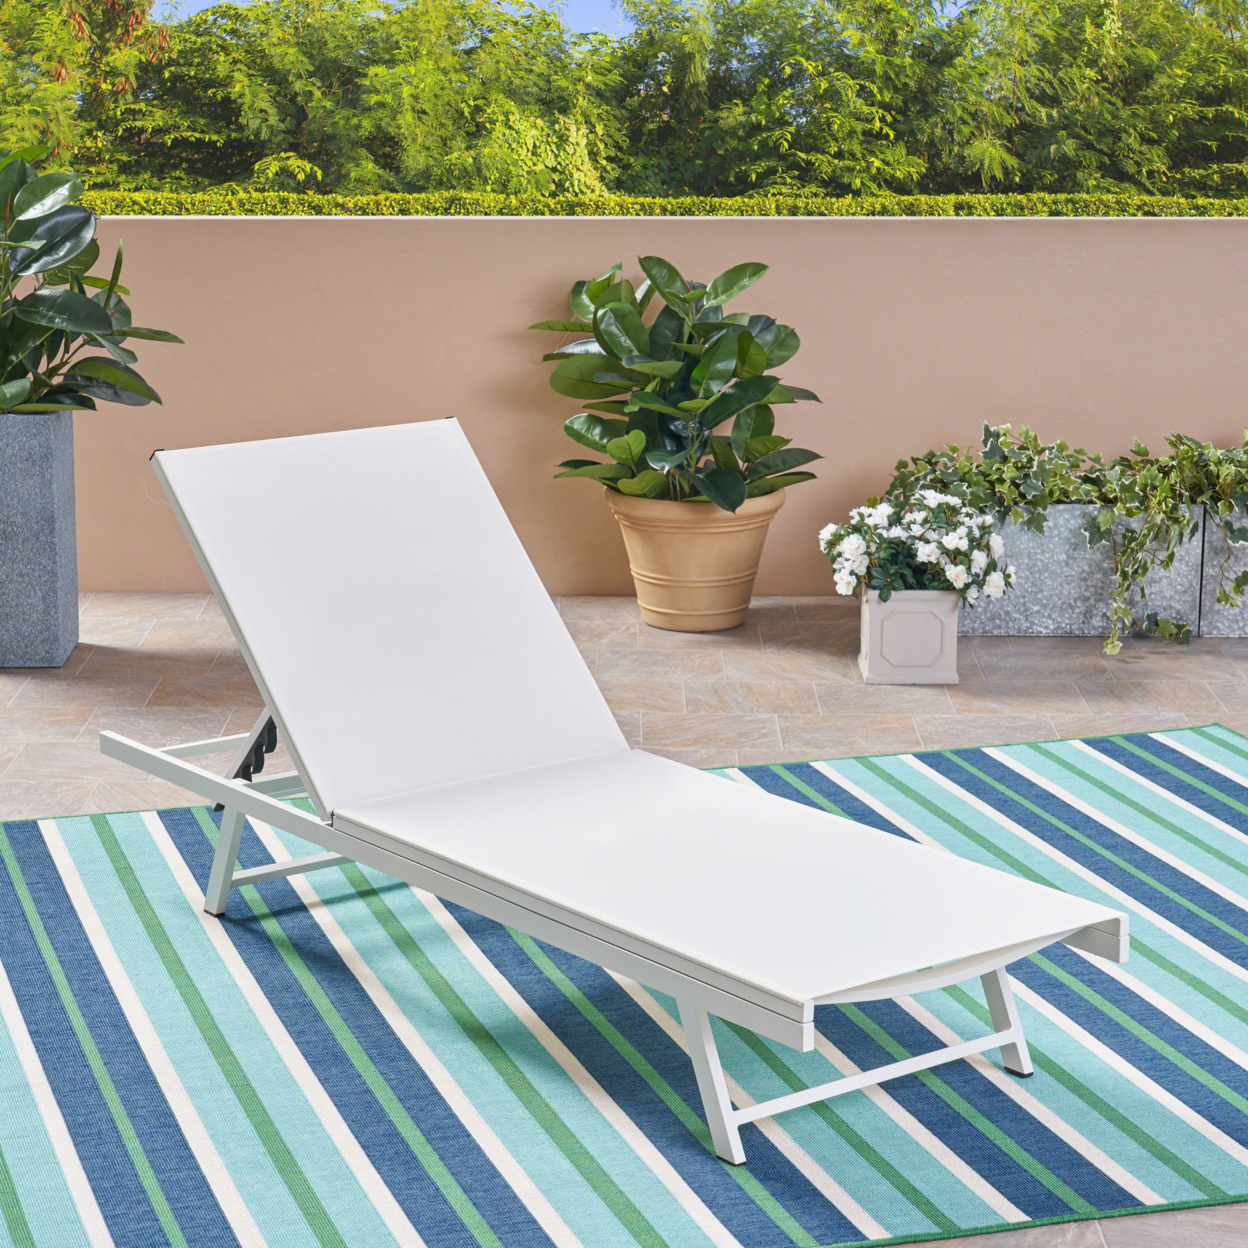 Simon Outdoor Aluminum And Mesh Adjustable Chaise Lounge Chair For Pool, Backyard - White, Set Of 2